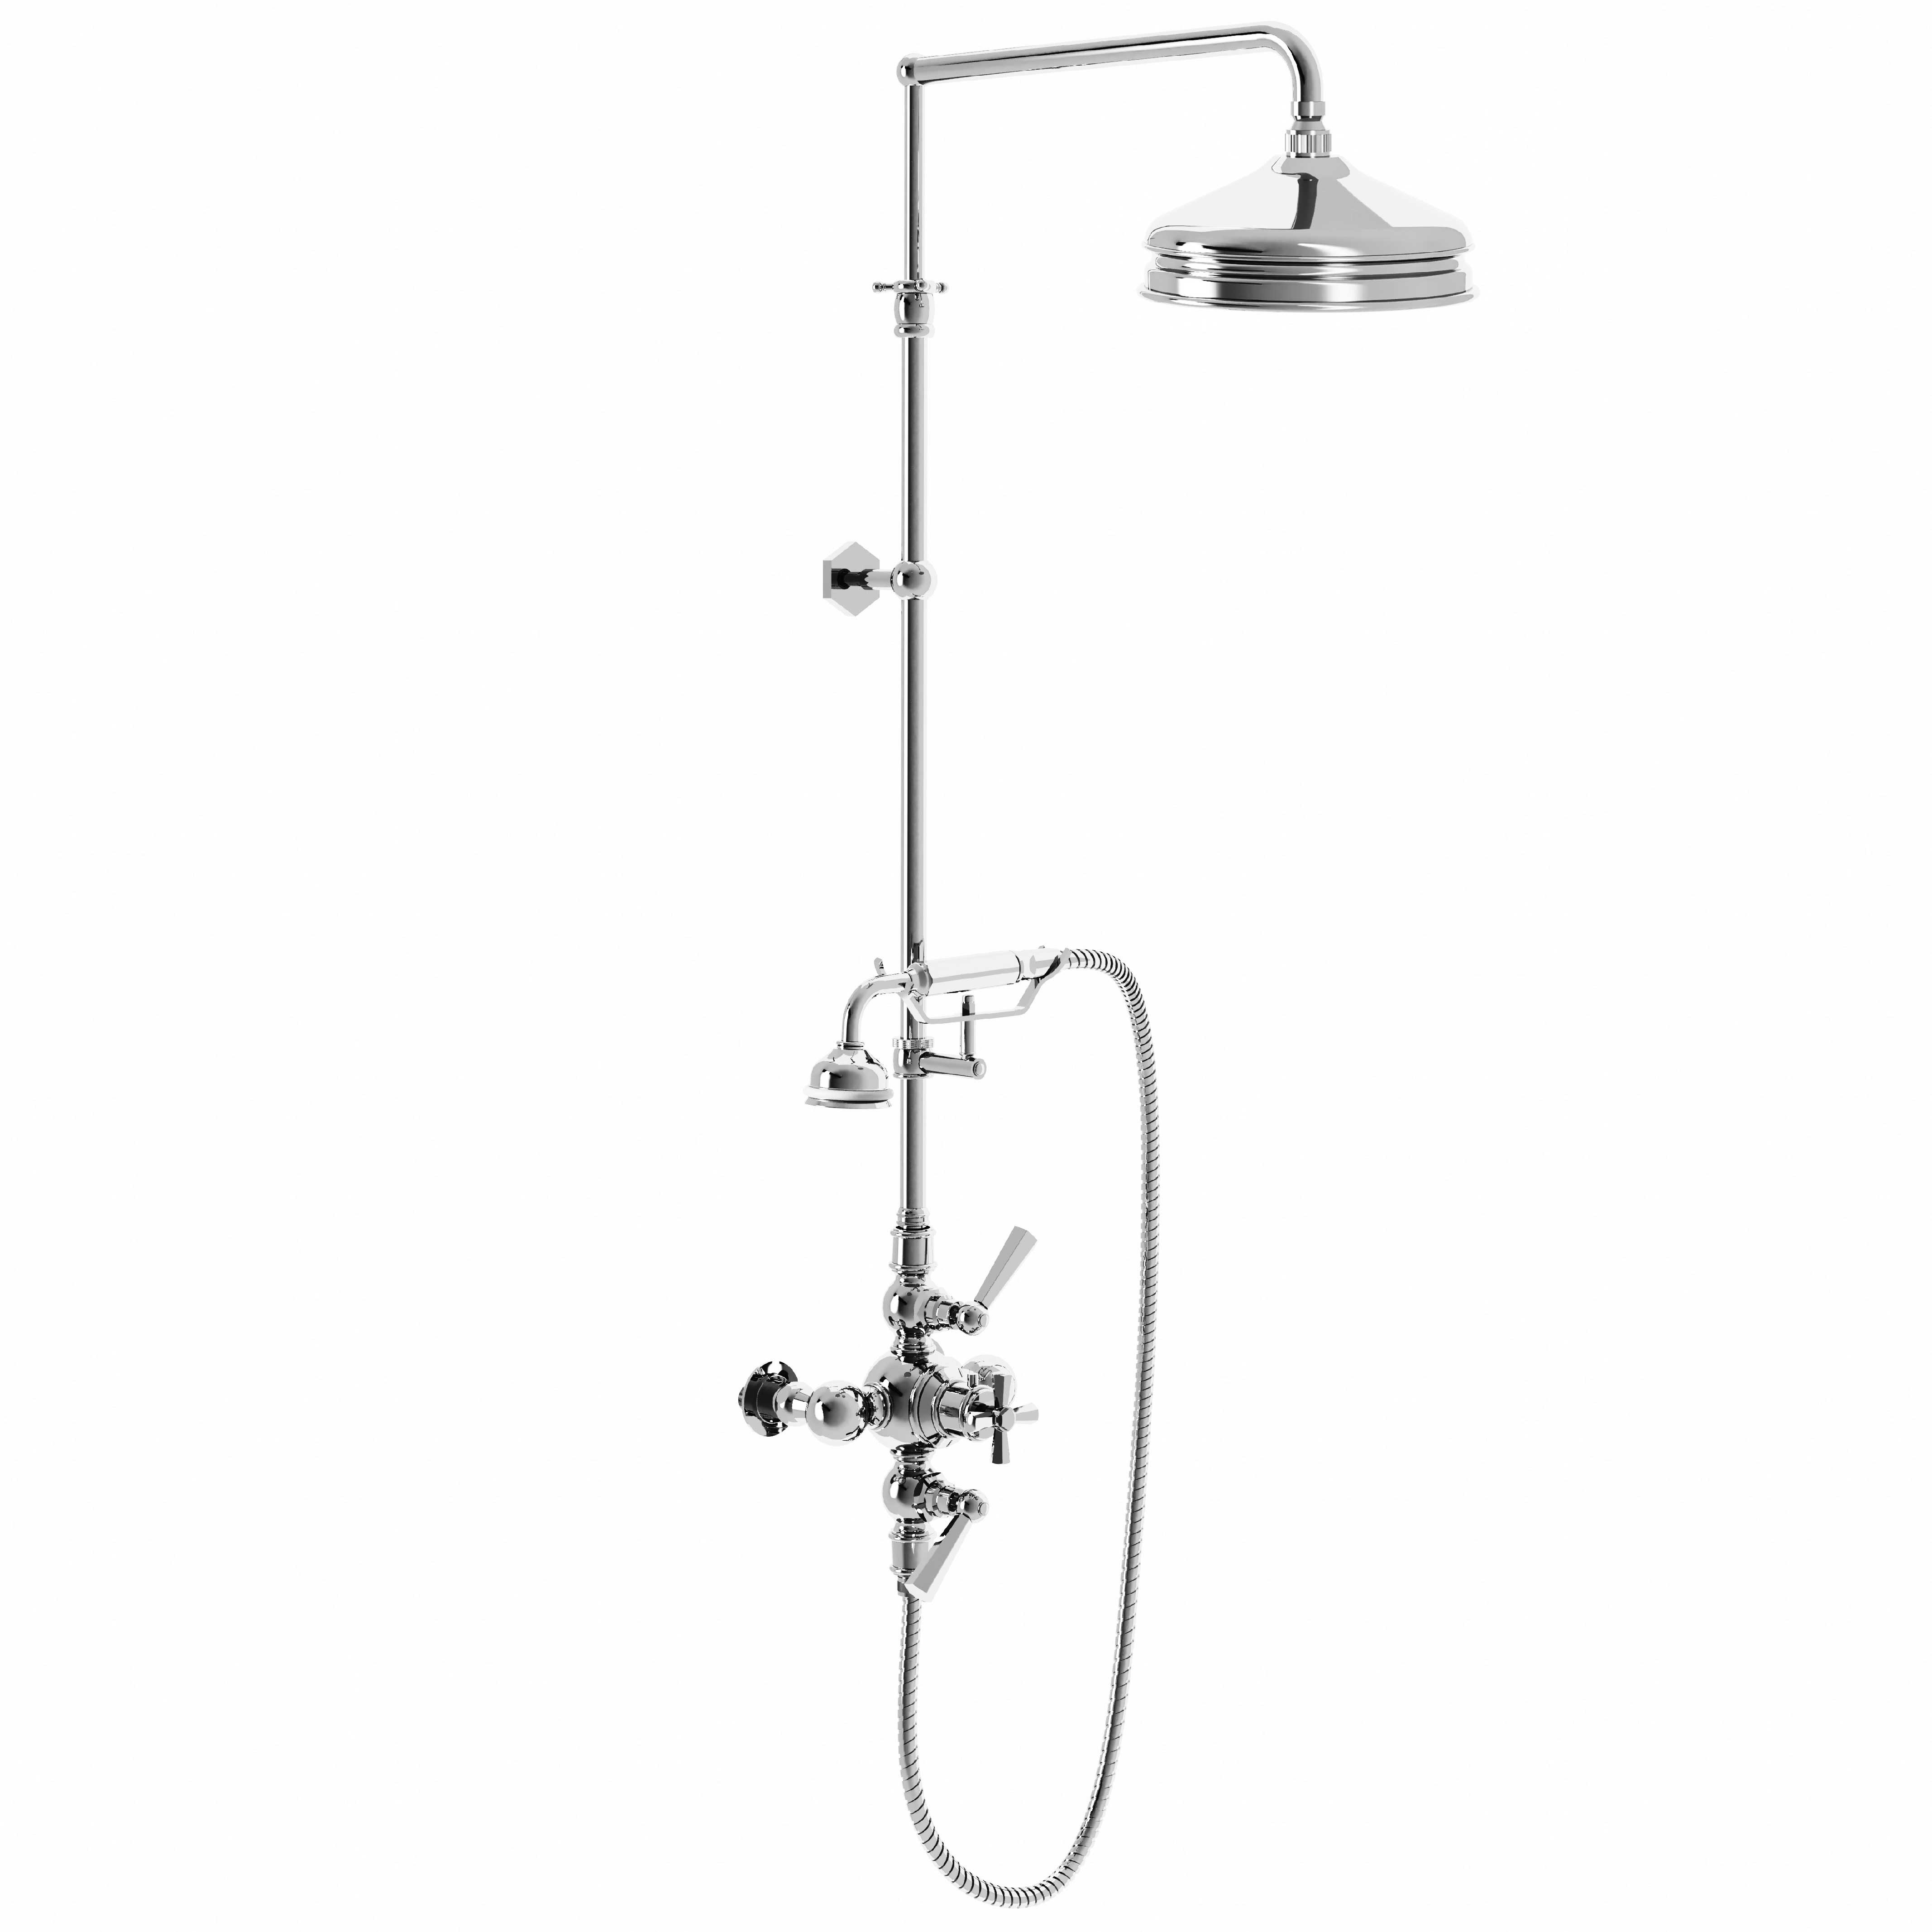 M38-2204T Thermo. shower mixer with column, anti-scaling